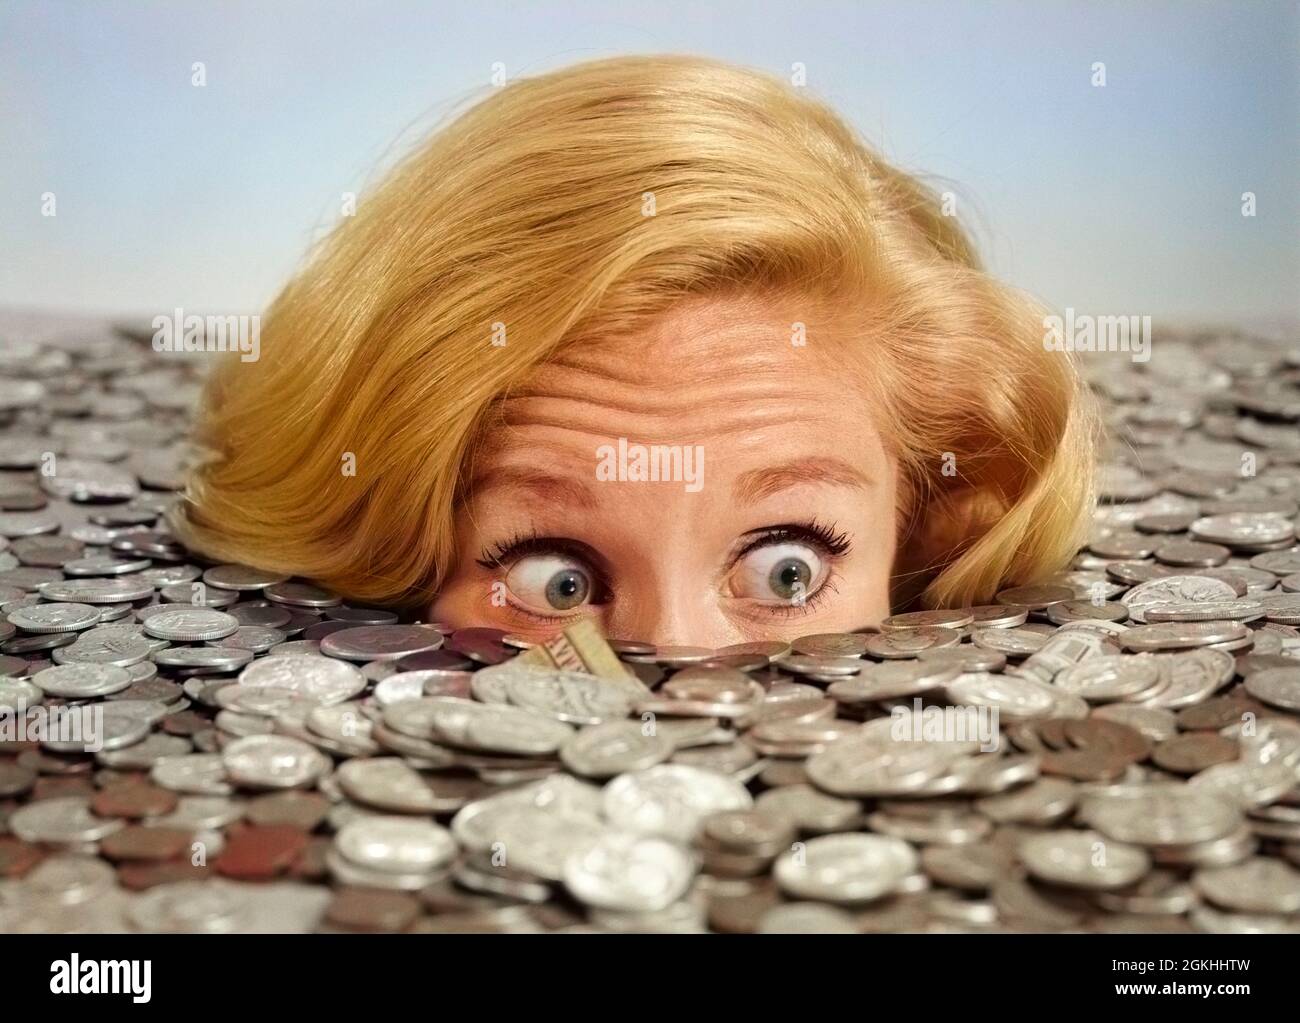 1960s BUG-EYED SURPRISED WOMAN BURIED IN COINS MONEY SYMBOLIC - s15481c HAR001 HARS BUG-EYED OVERWHELMED SURROUNDED WEALTH OVERWHELM INUNDATED CONCEPTUAL INUNDATION INUNDATE SYMBOLIC OVERWHELMING YOUNG ADULT WOMAN BLACK AND WHITE CAUCASIAN ETHNICITY HAR001 OLD FASHIONED Stock Photo